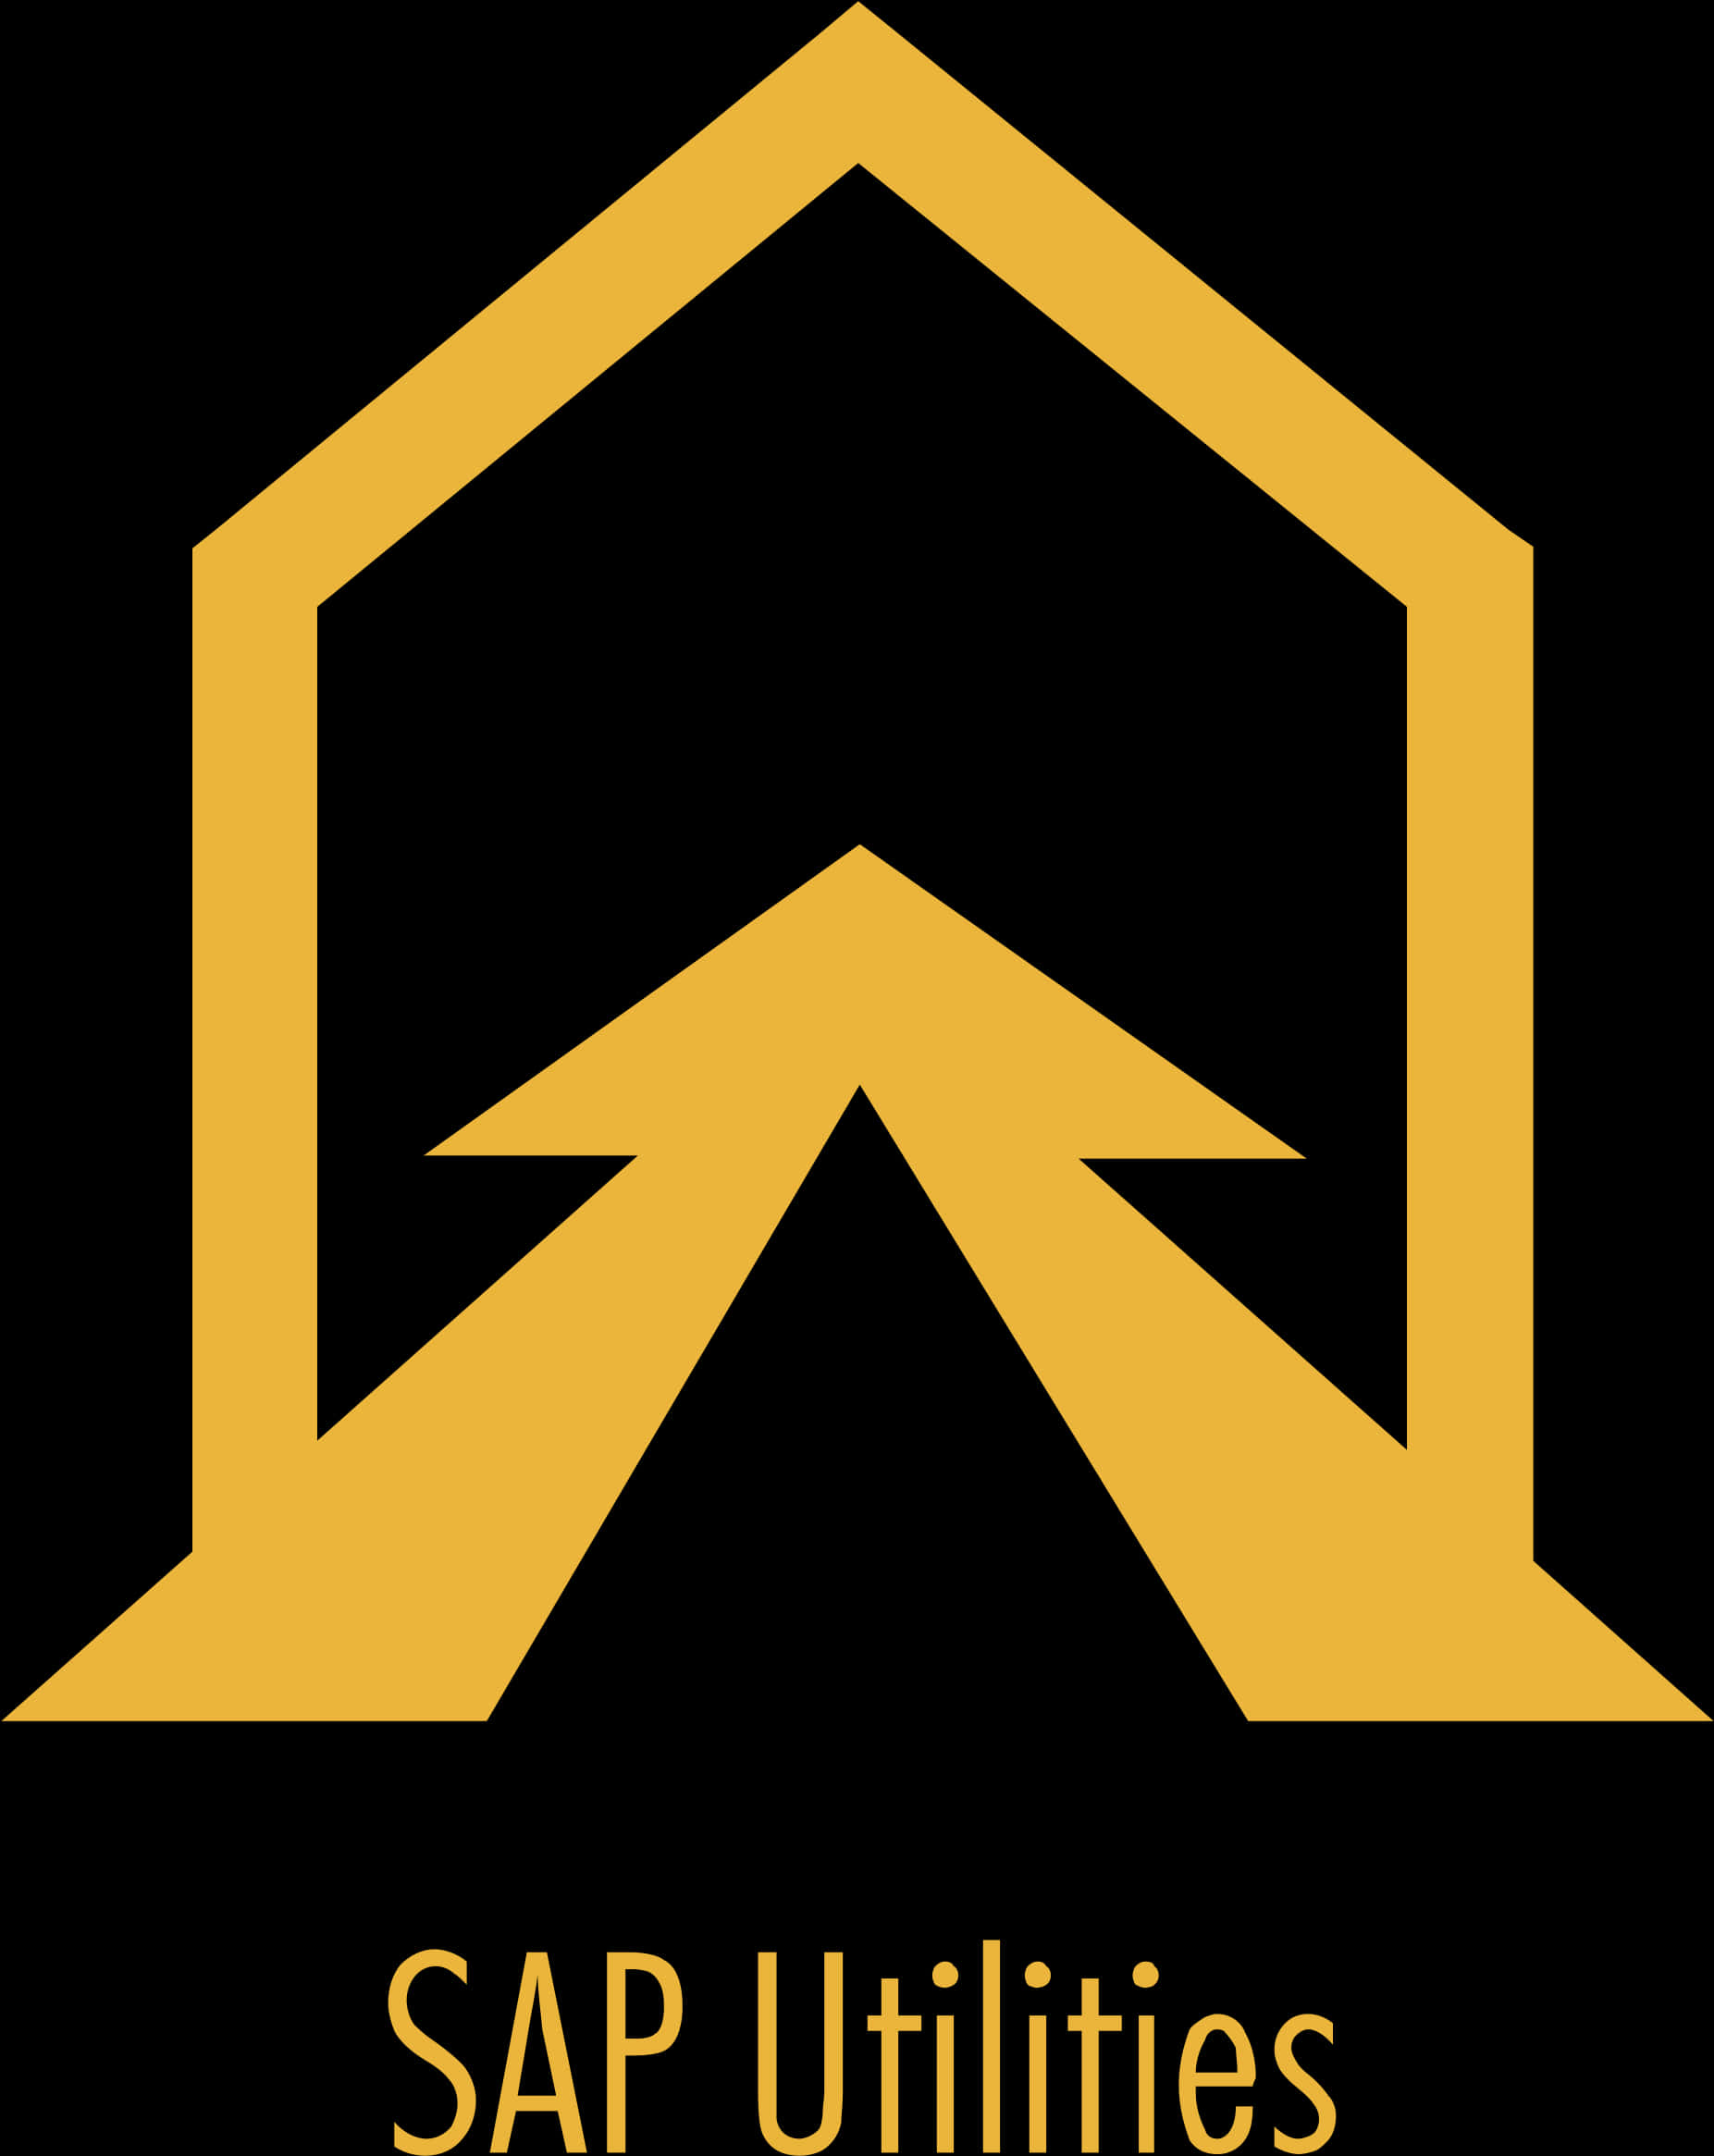 A Yellow Arrow In A House